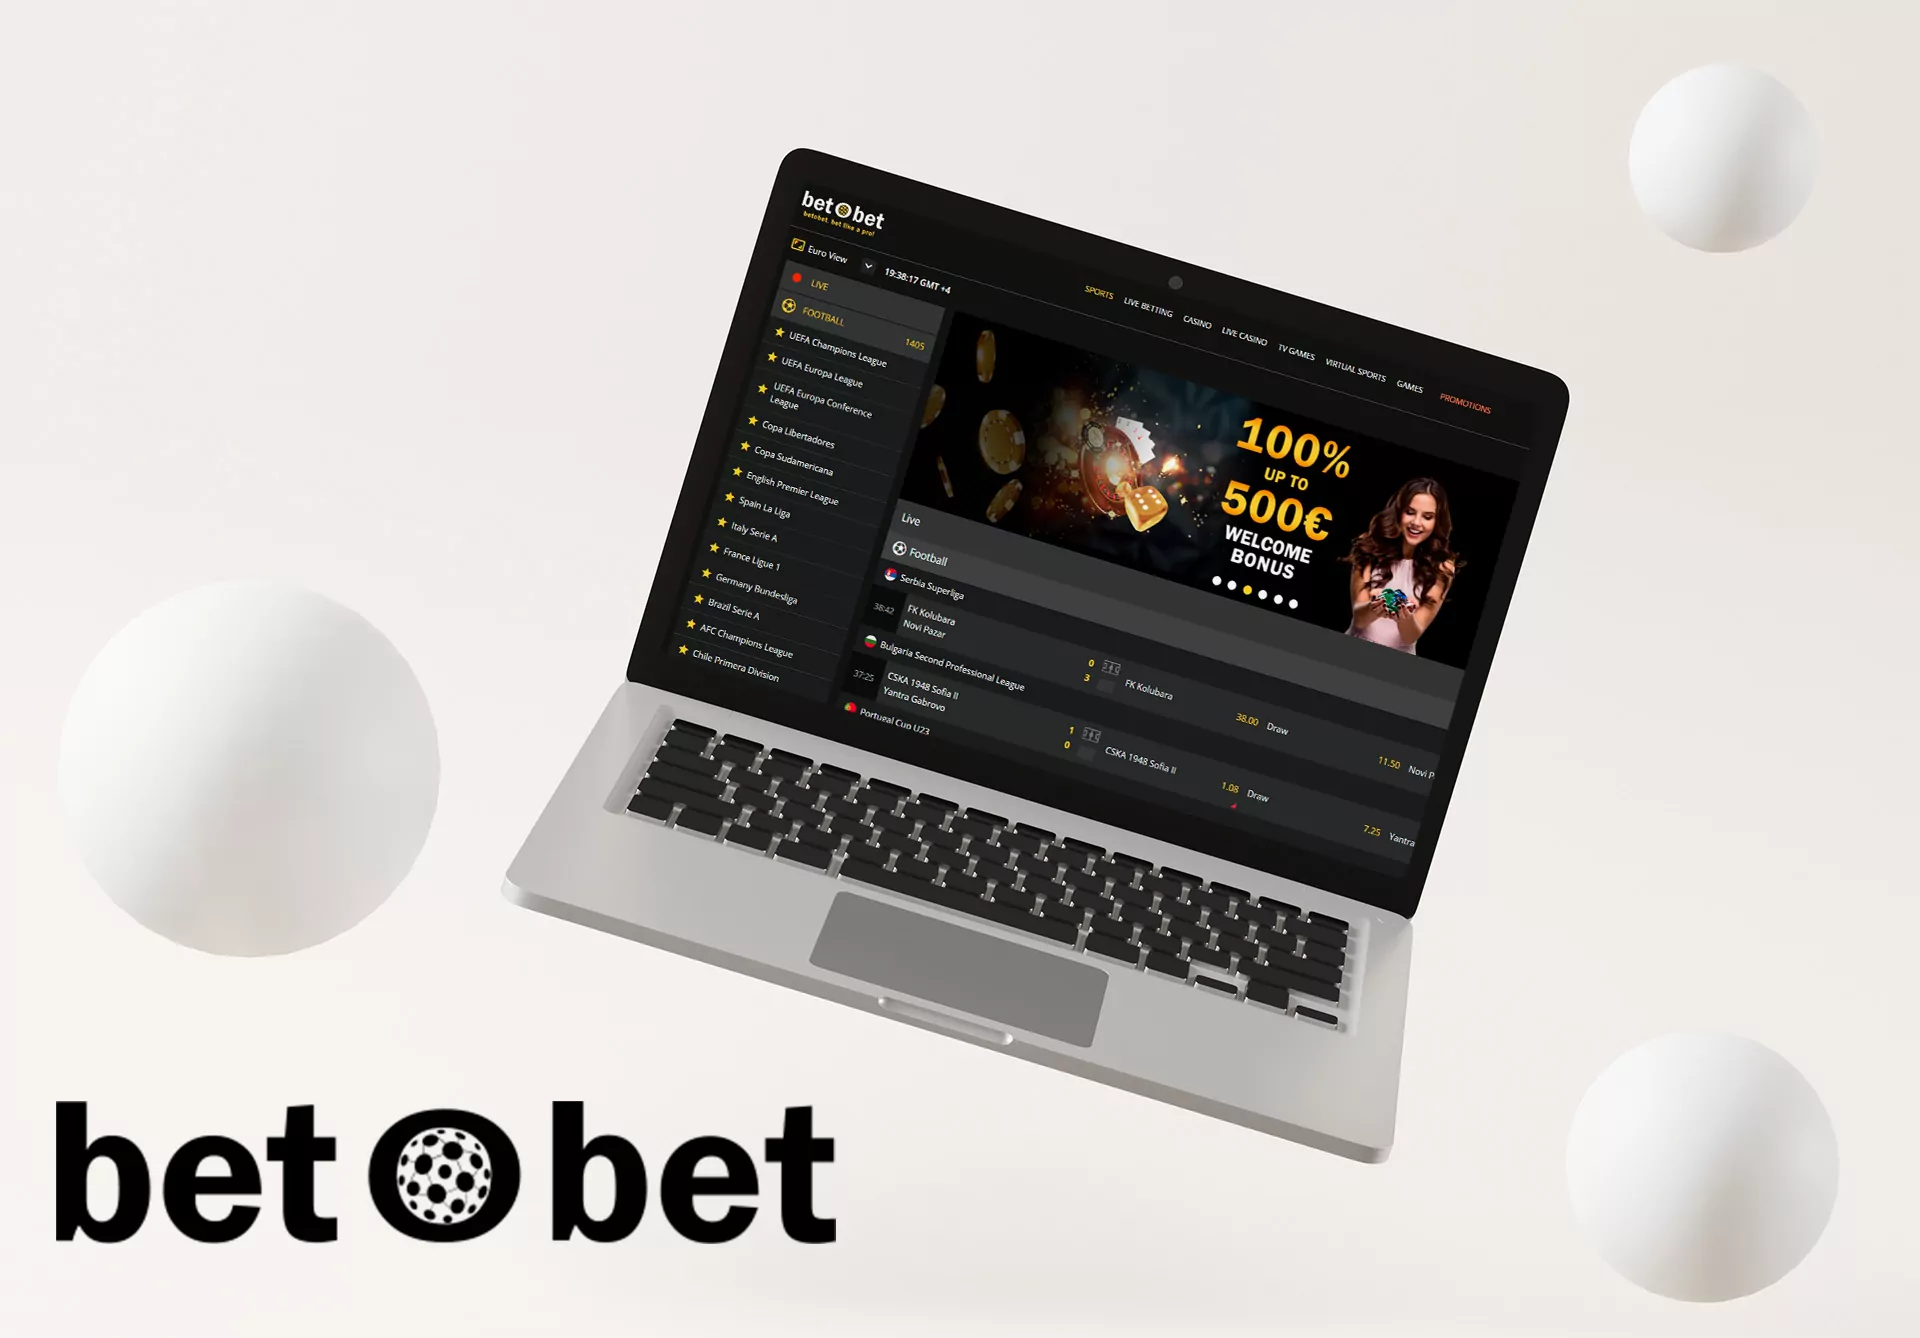 Betobet offers more then 20 sports for online betting and casino games for Bangladesh players.